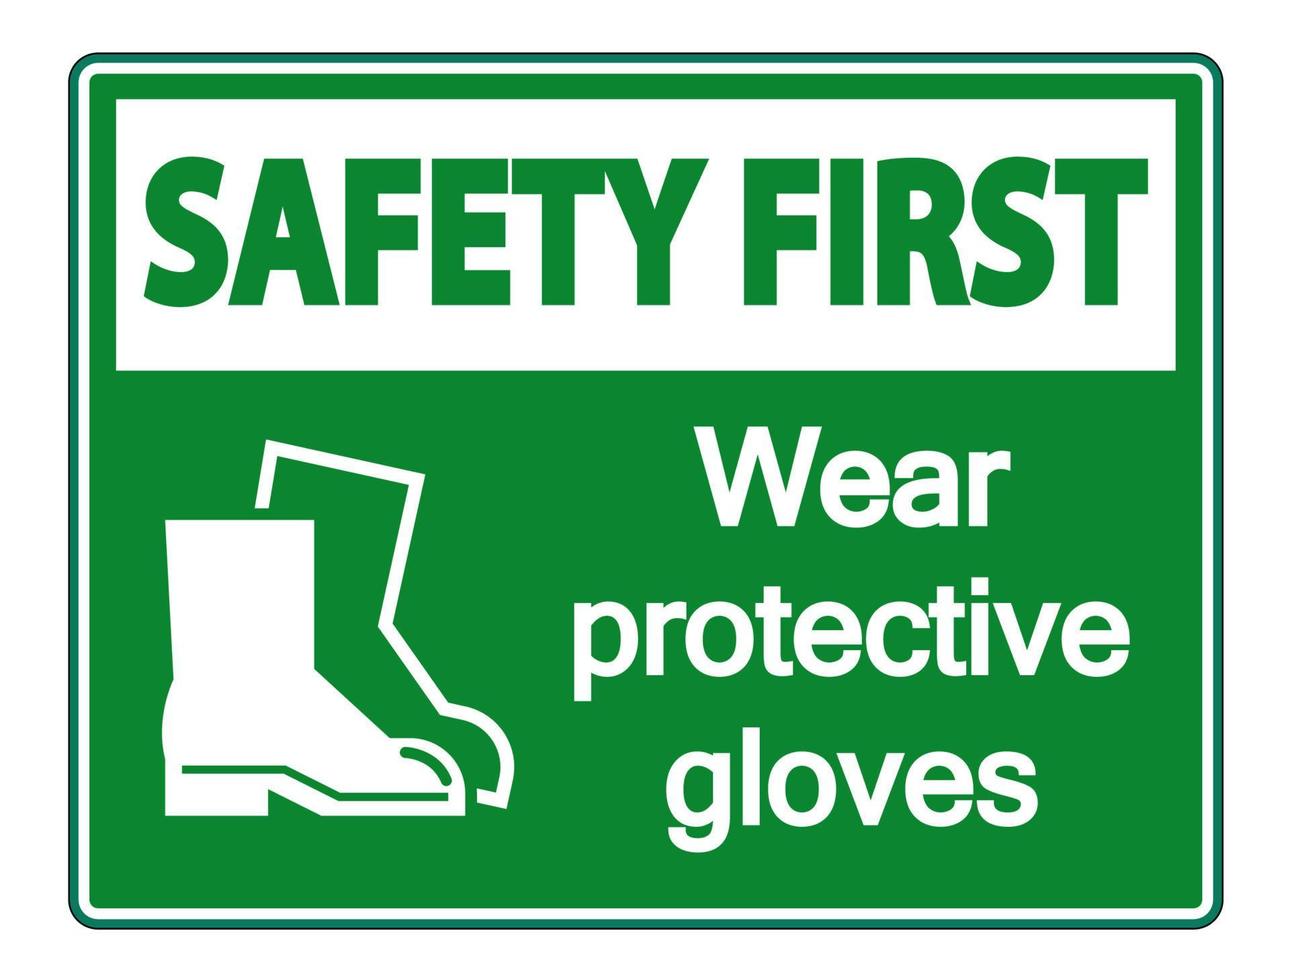 Safety first Wear protective footwear sign on transparent background vector